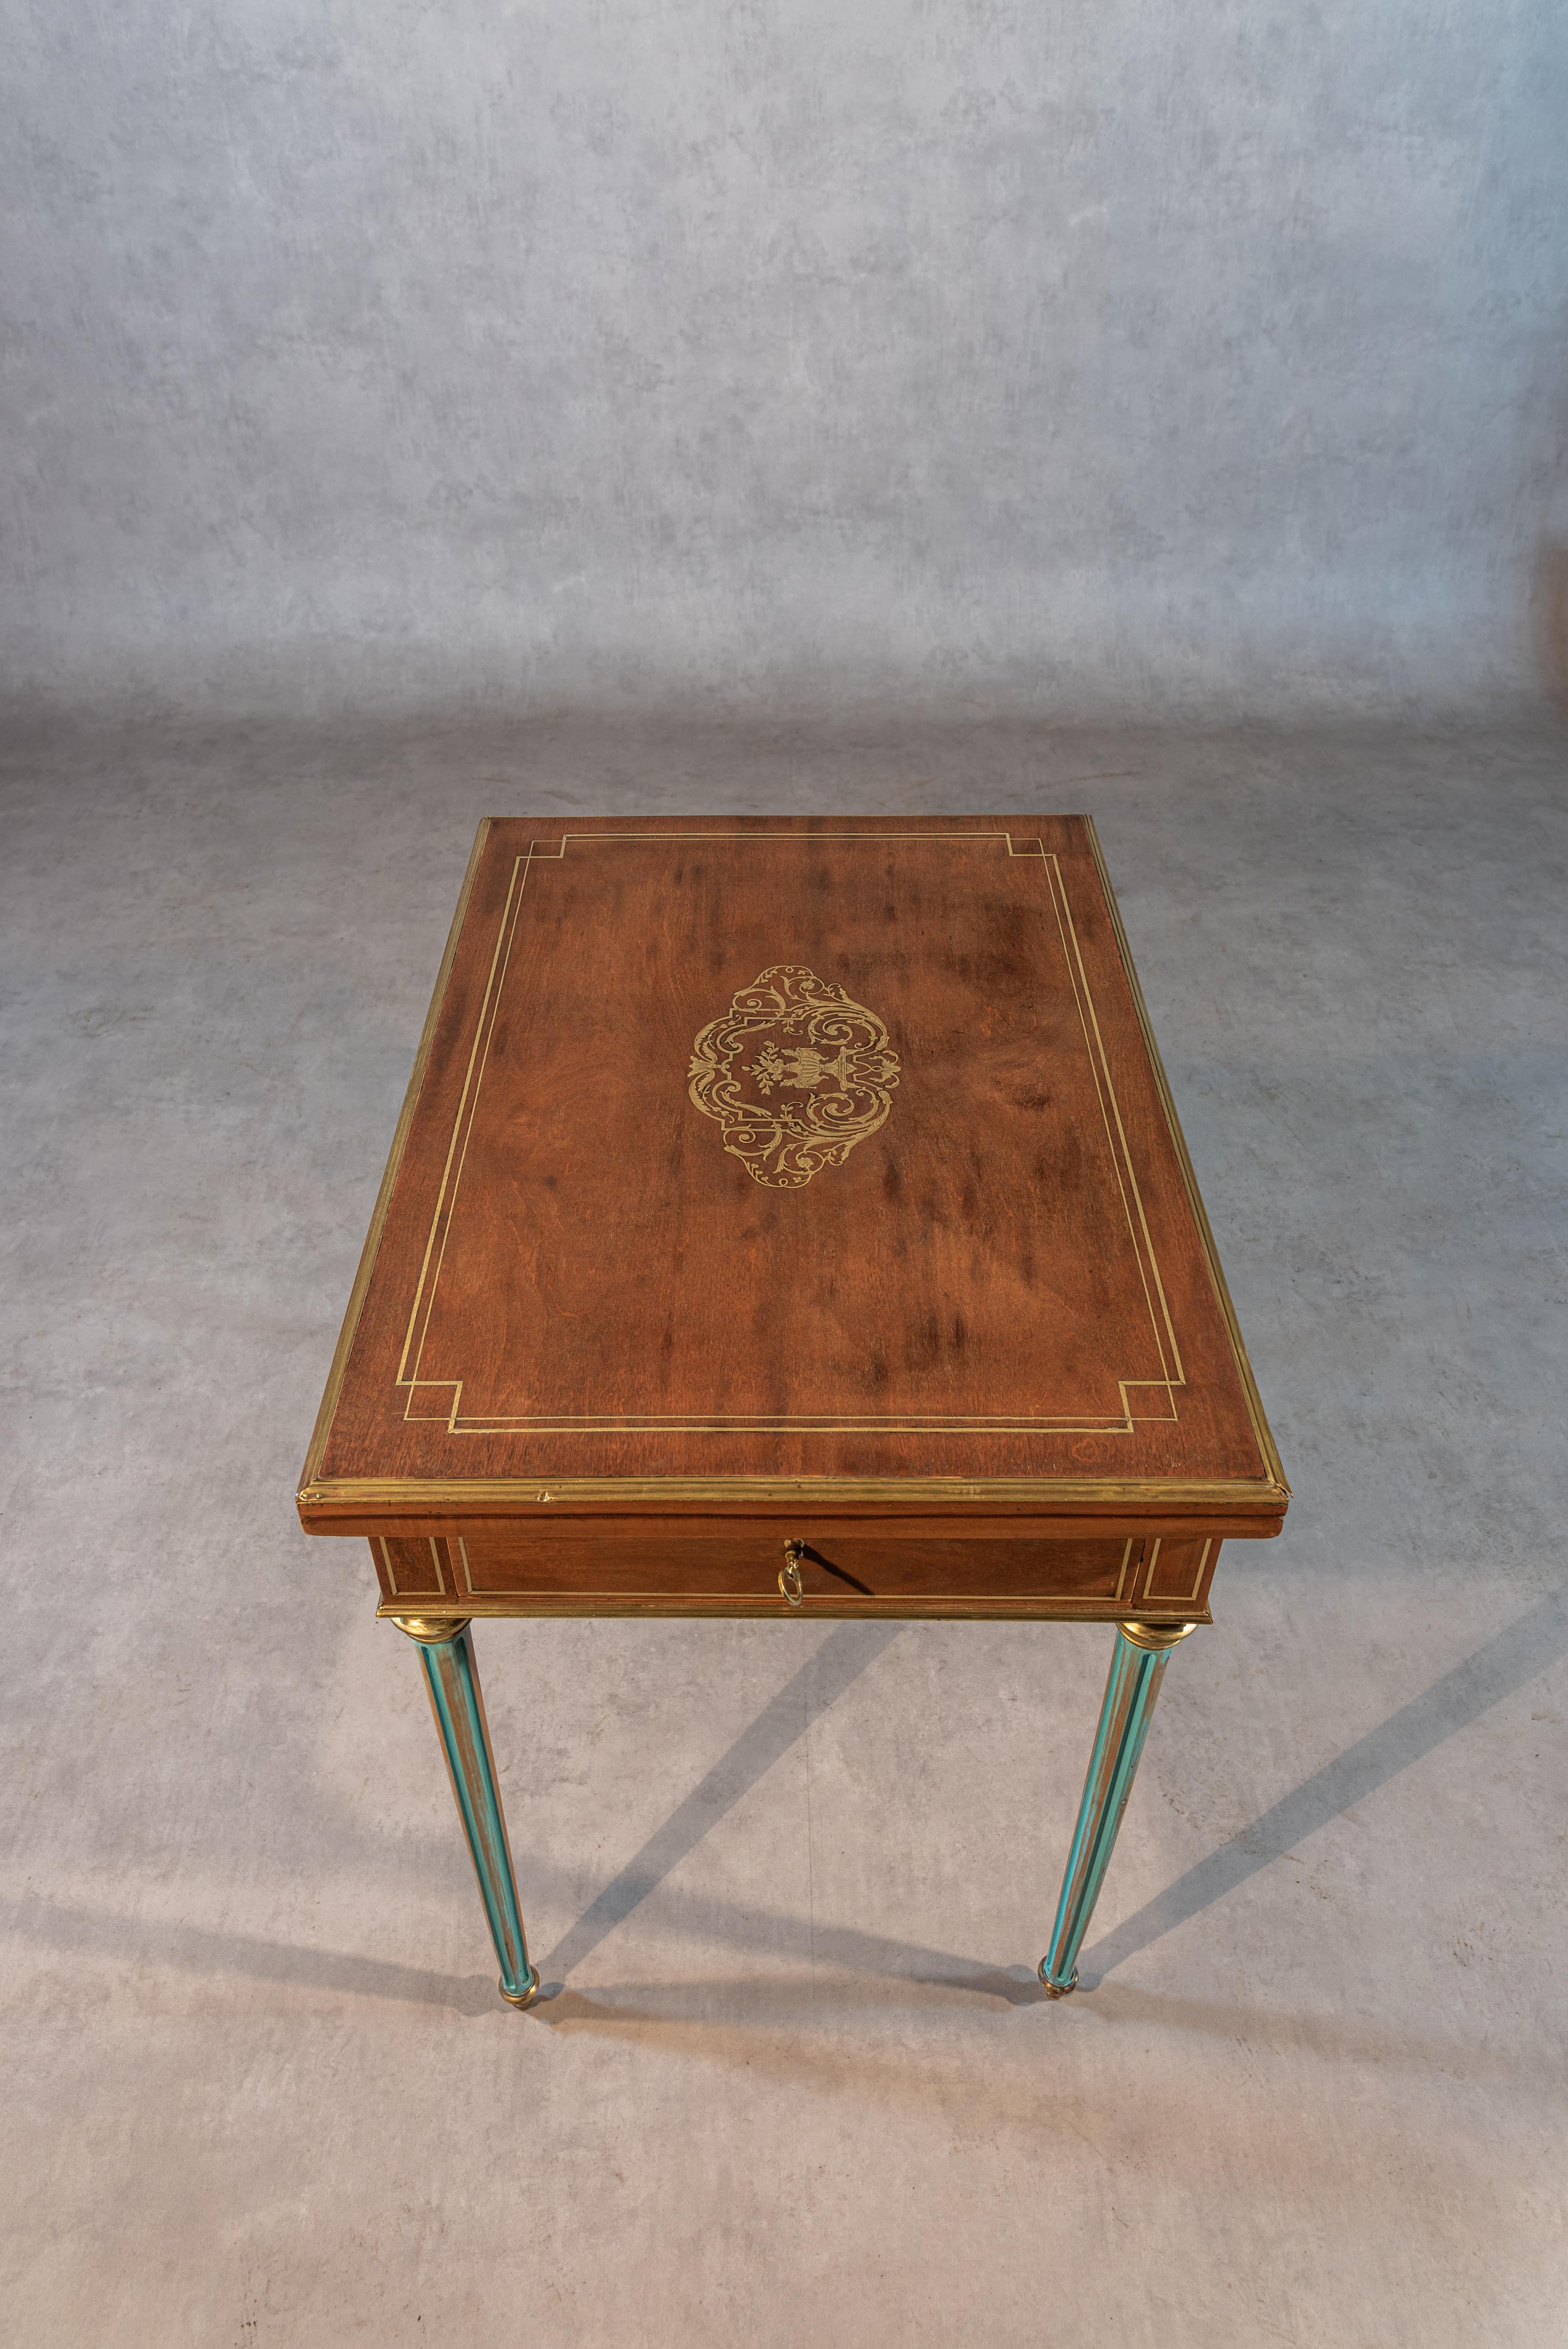 This 19th century French Louis XVI Style Game Table is a stunning piece that seamlessly combines elegance, functionality, and versatility. Crafted in the style of Louis XVI, it showcases exquisite craftsmanship and attention to detail. The table